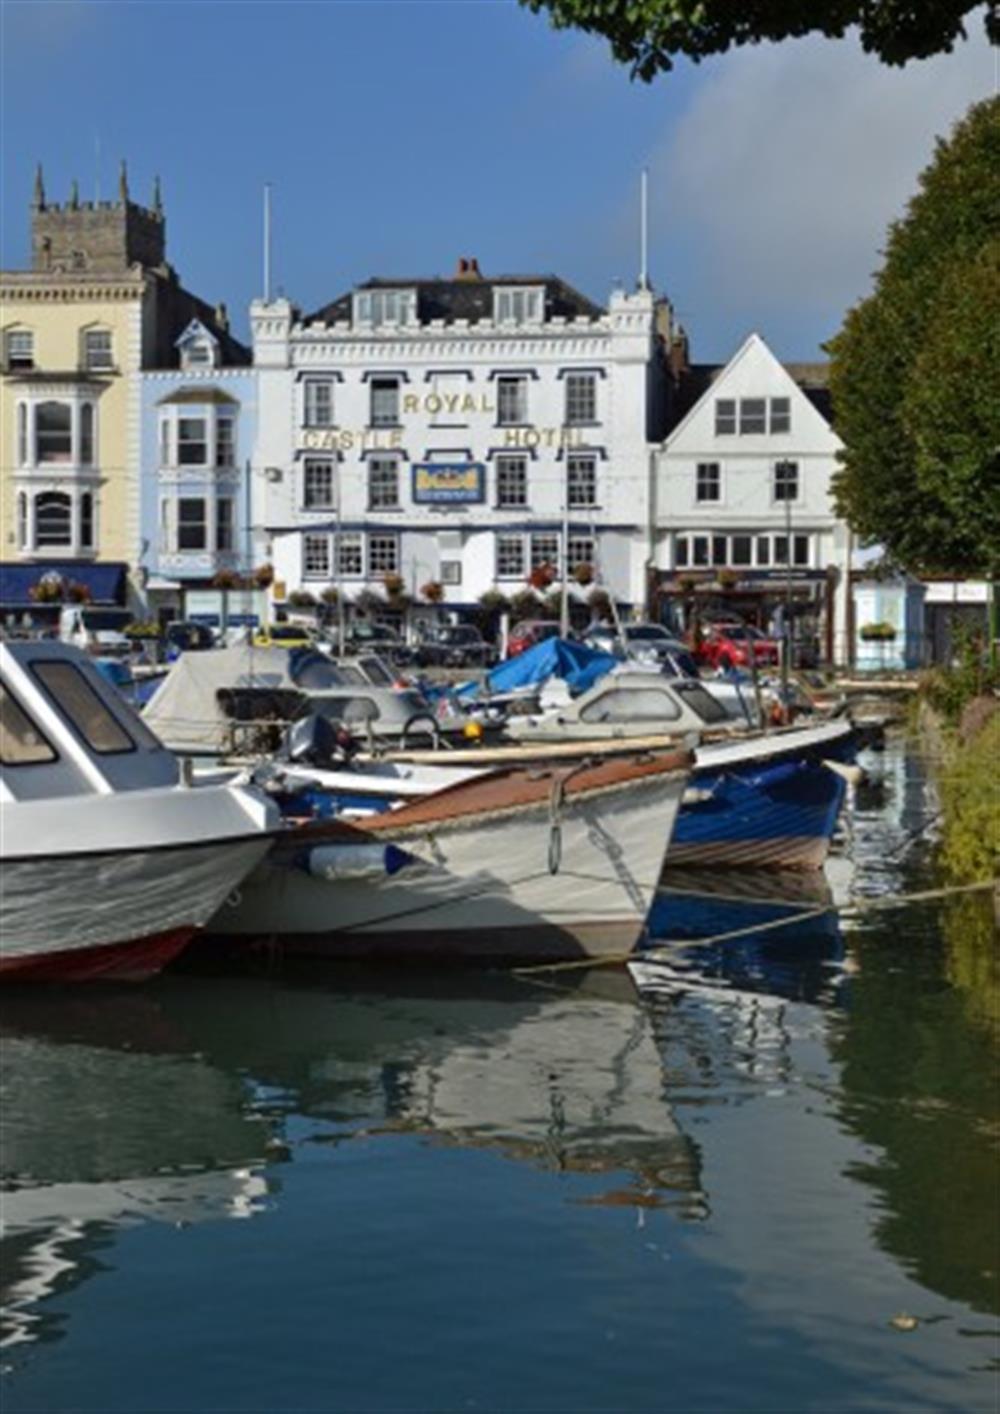 Historic Dartmouth with shops, cinema, and good eateries along with the Royal Naval College and situated on the River Dart.